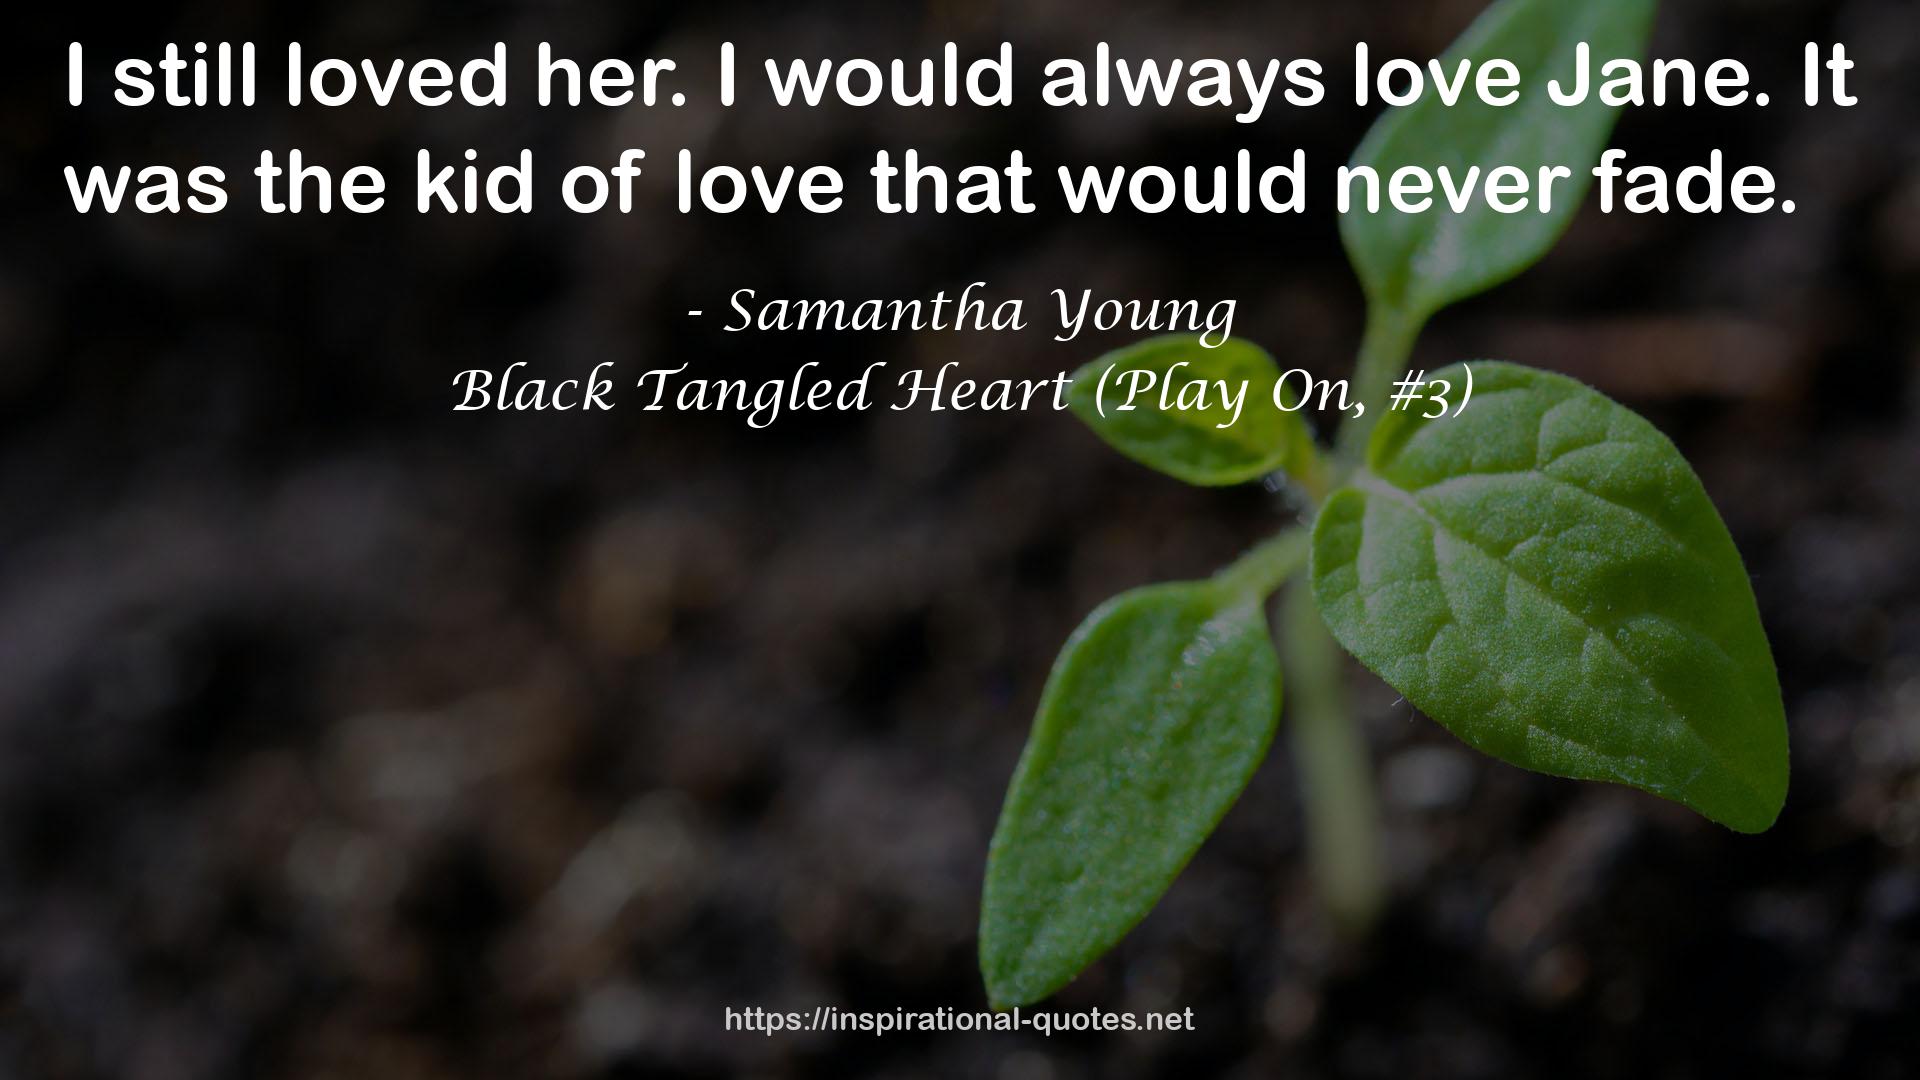 Black Tangled Heart (Play On, #3) QUOTES